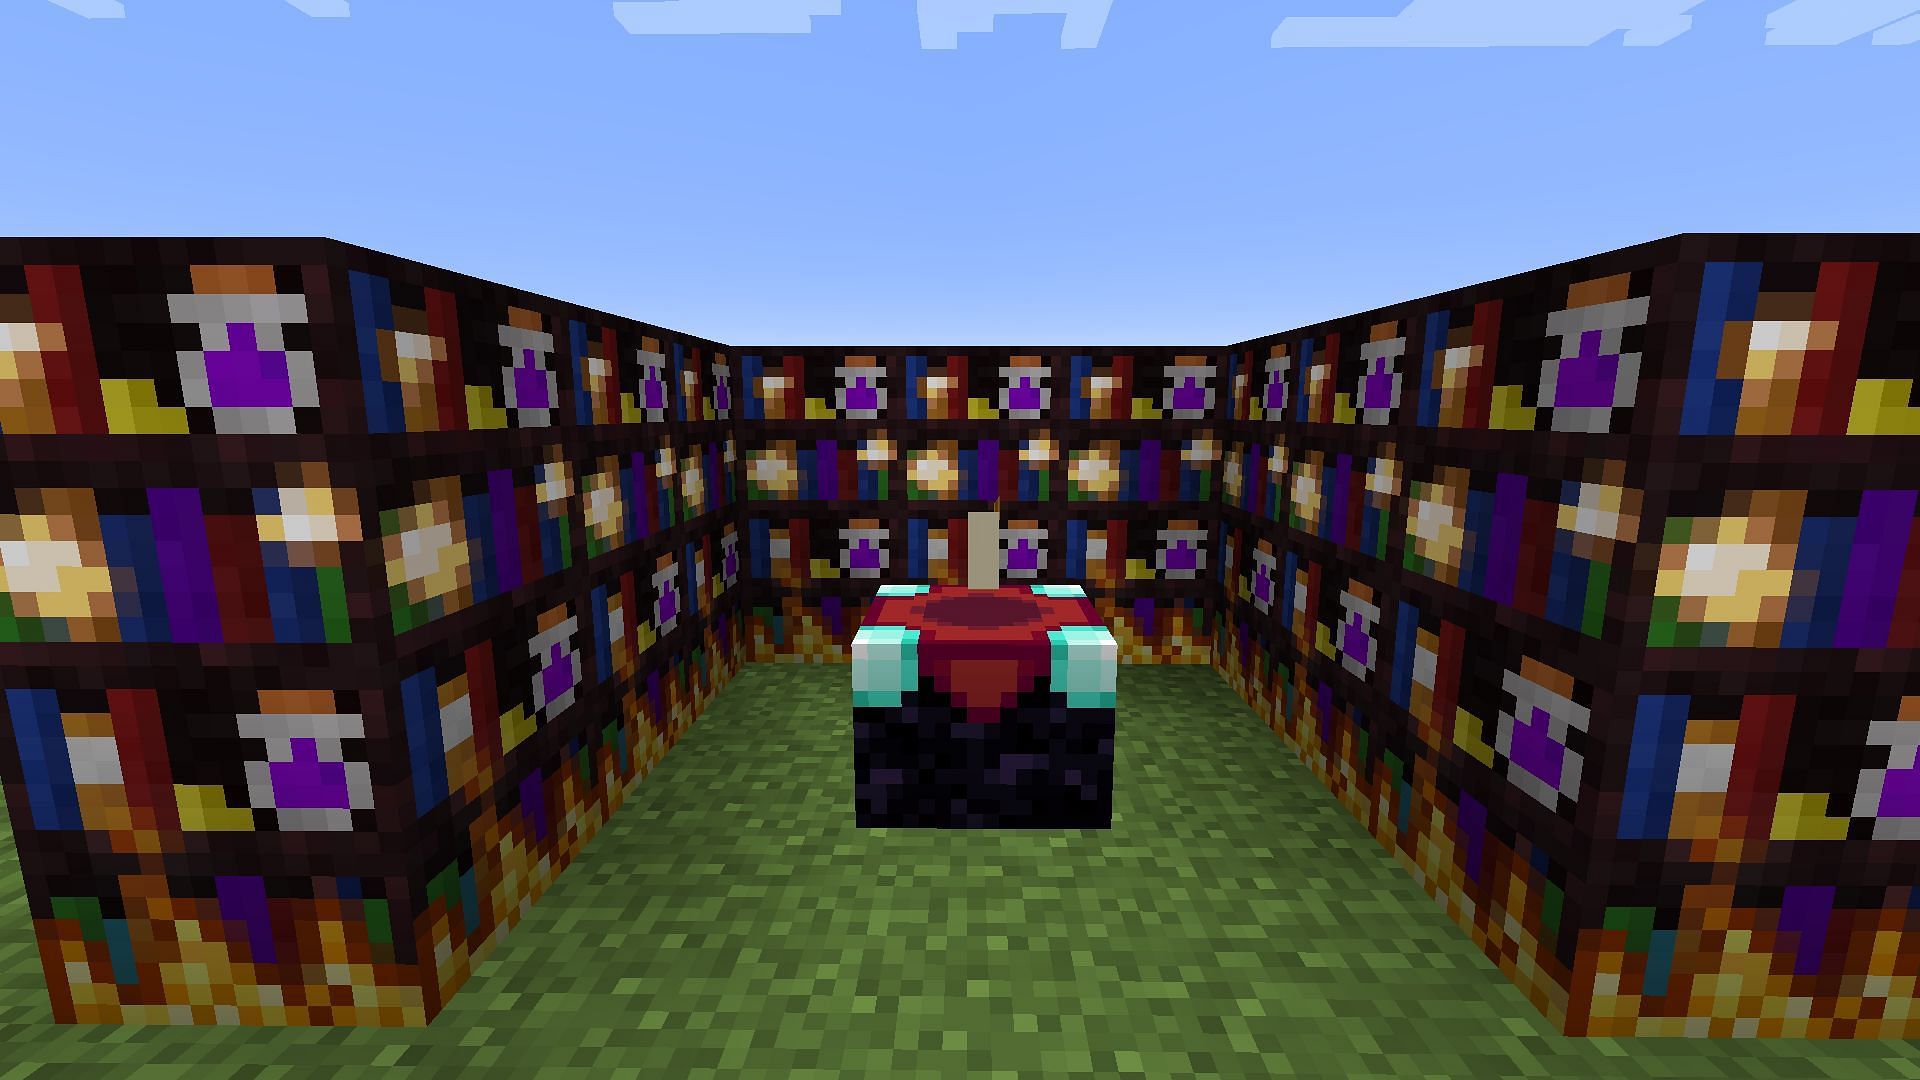 Hellshelves surrounding an enchanting table in the Apotheosis Minecraft mod (Image via Shadows_of_Fire/CurseForge)